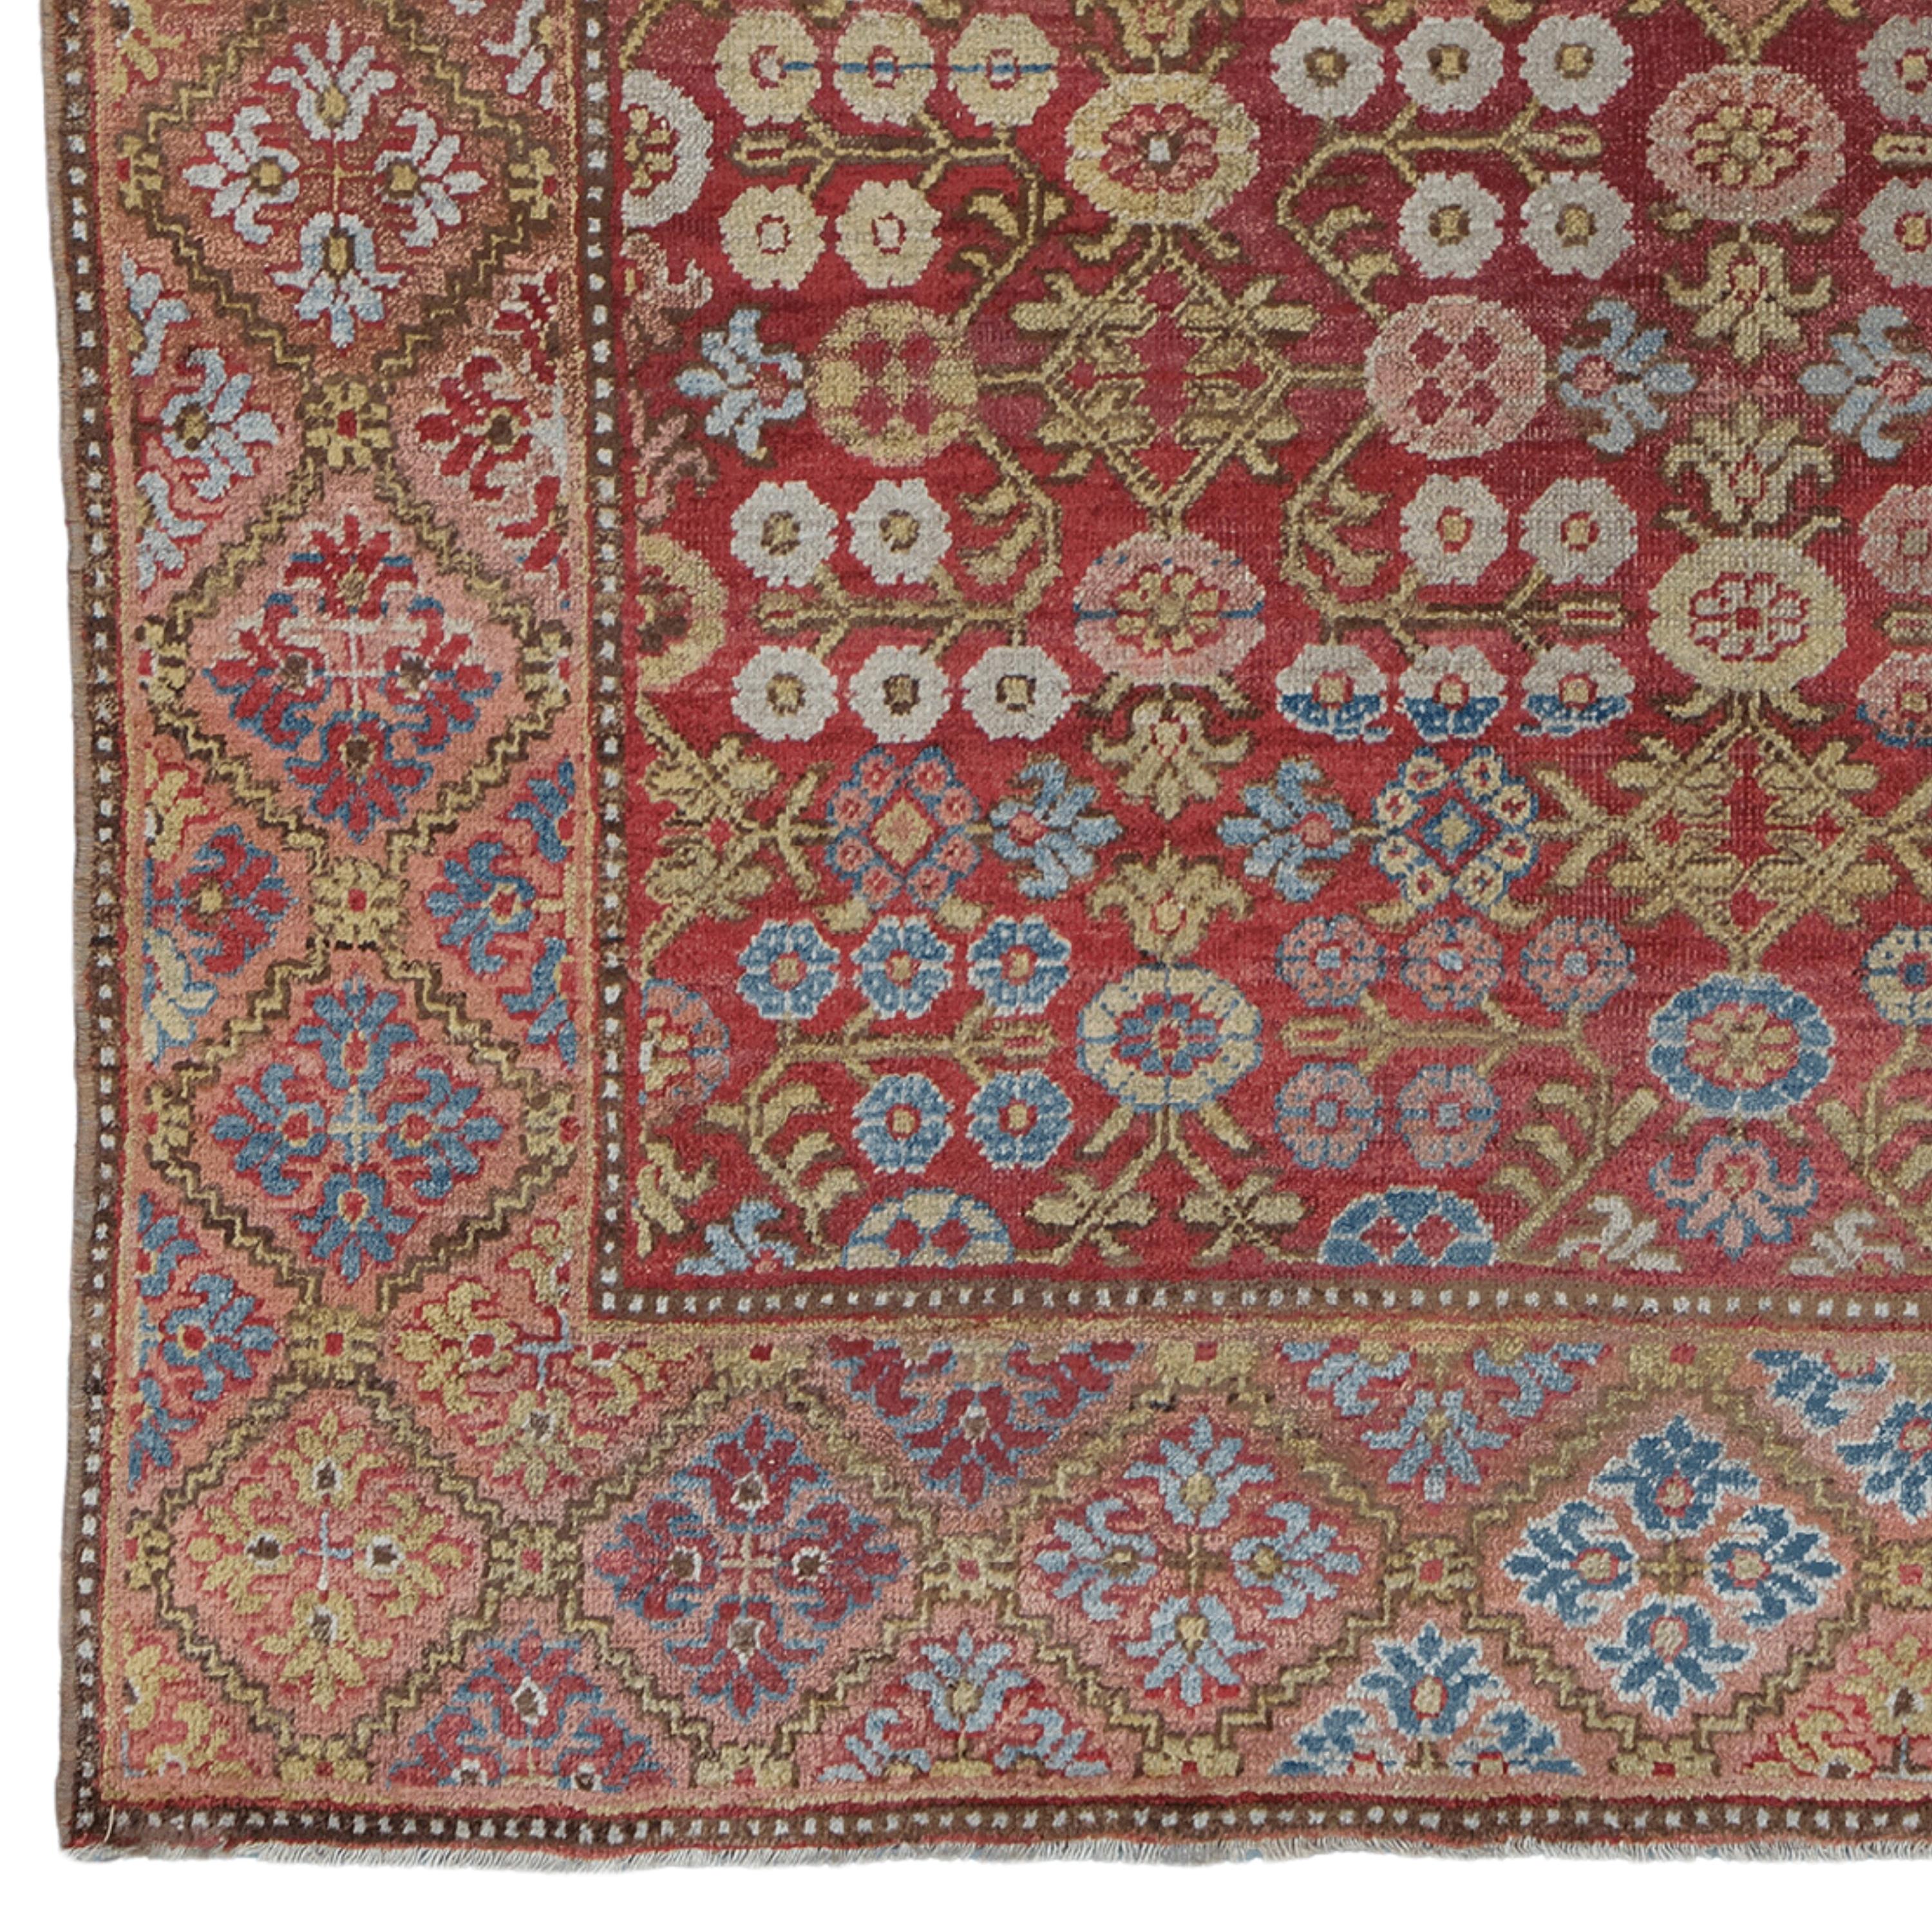 This exquisite antique Khotan rug is a work of art from the late 19th century. This piece, which draws attention with its rich color palette and complex patterns, has a feature that will enrich the atmosphere of any space. Wool material is known for